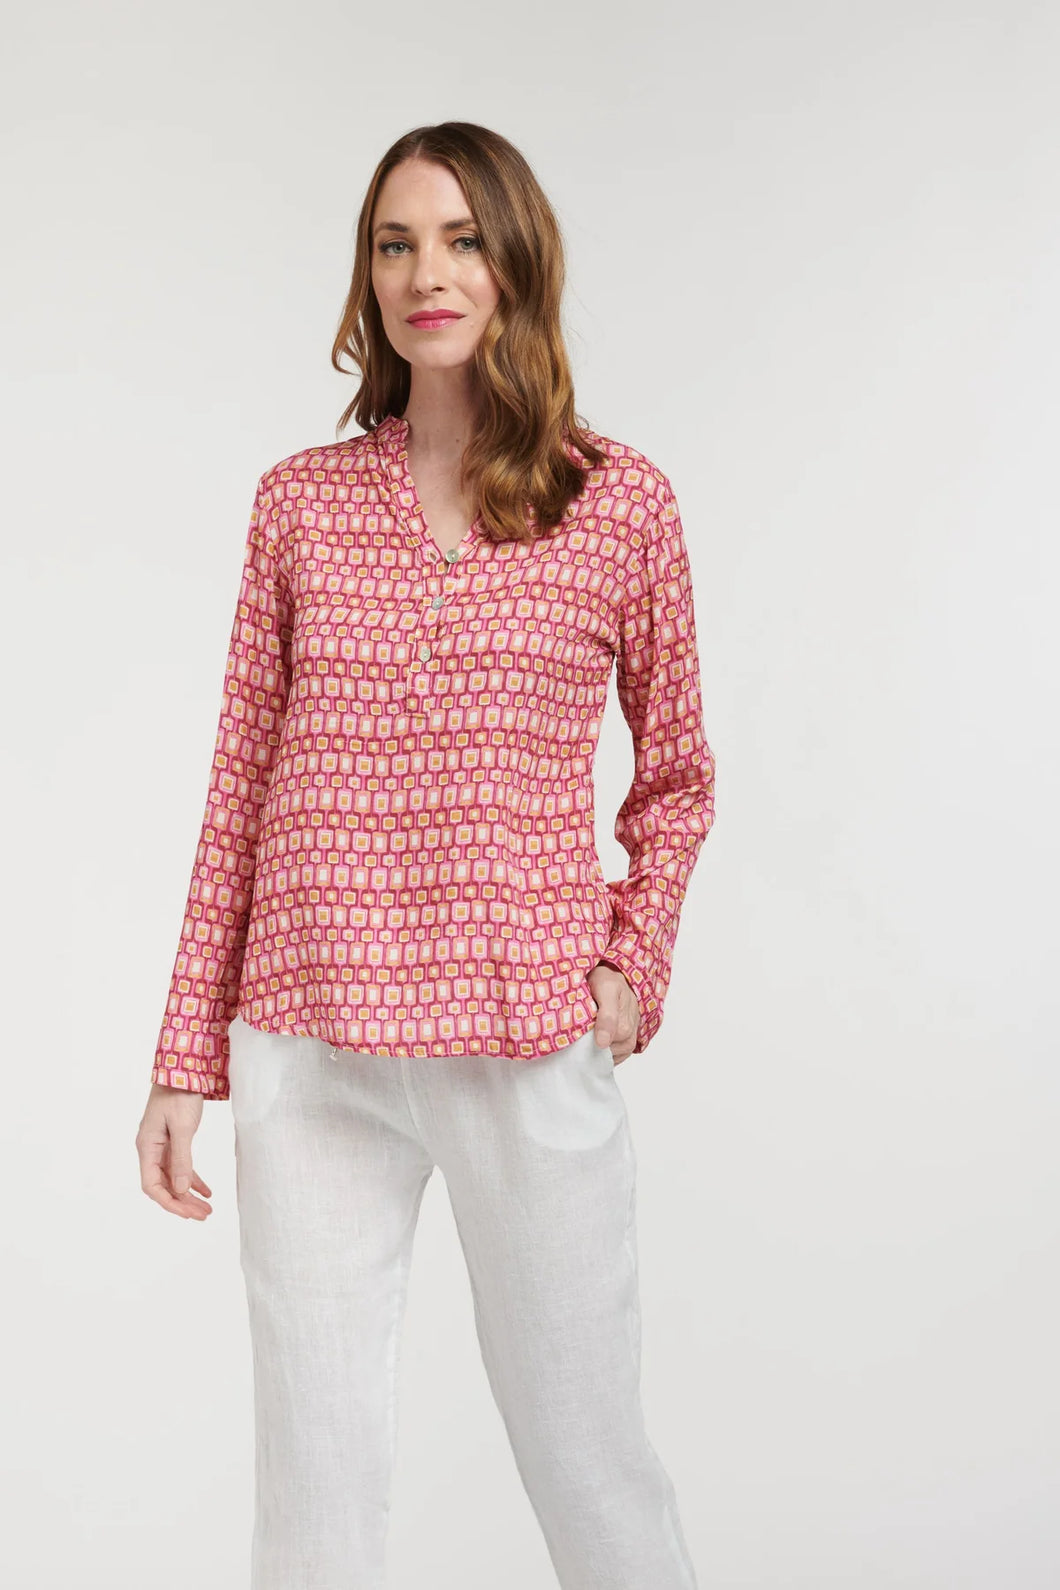 Love from Italy Formica shirt pink